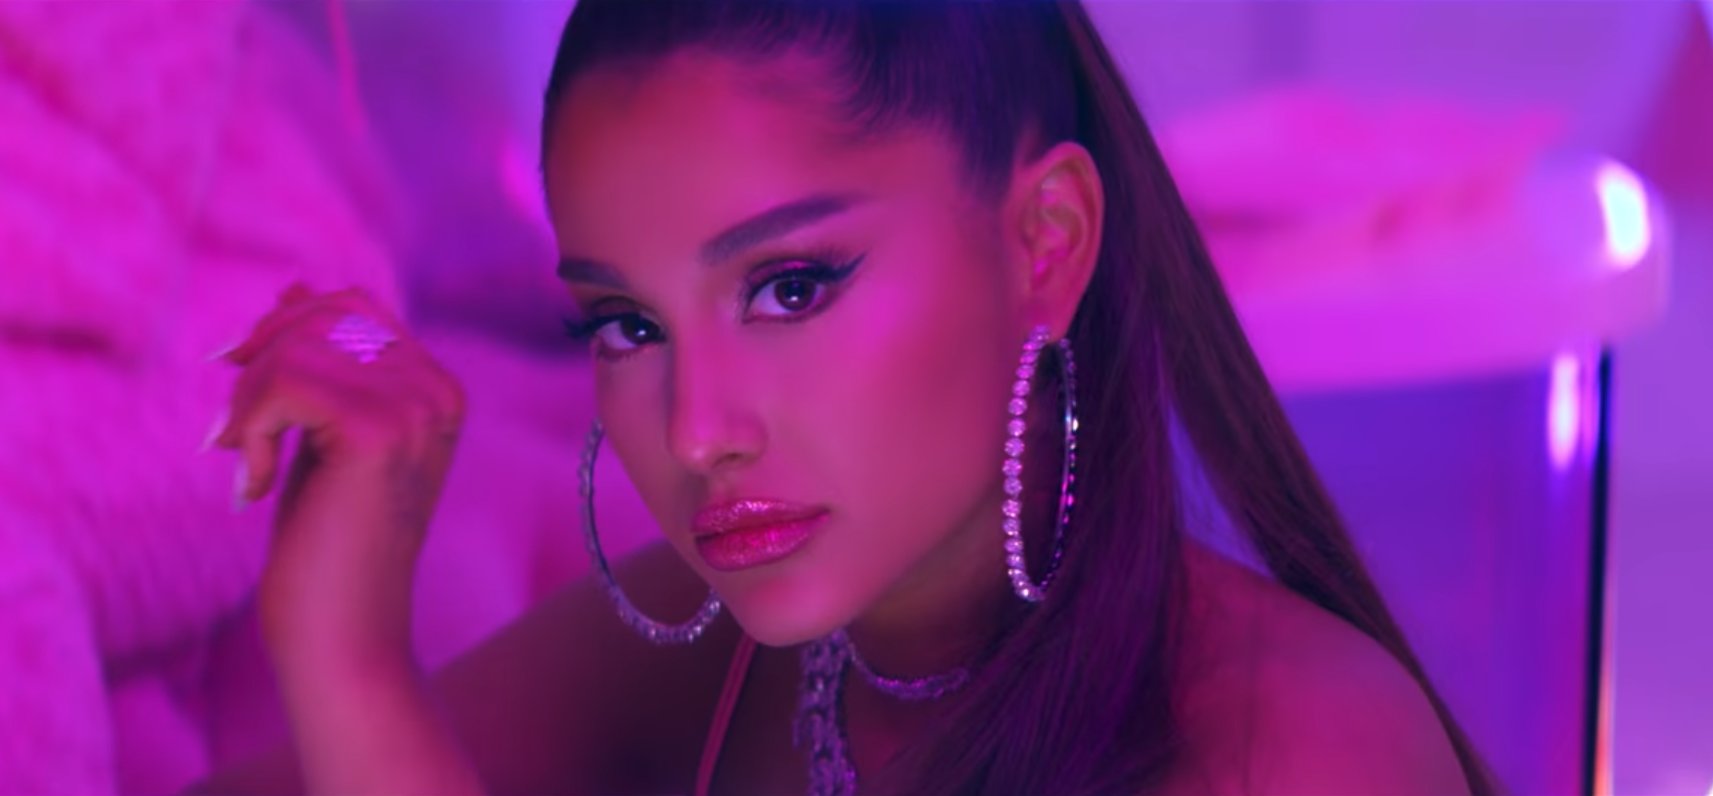 Who Are The Girls In 7 Ariana Grande 7 Rings Video?